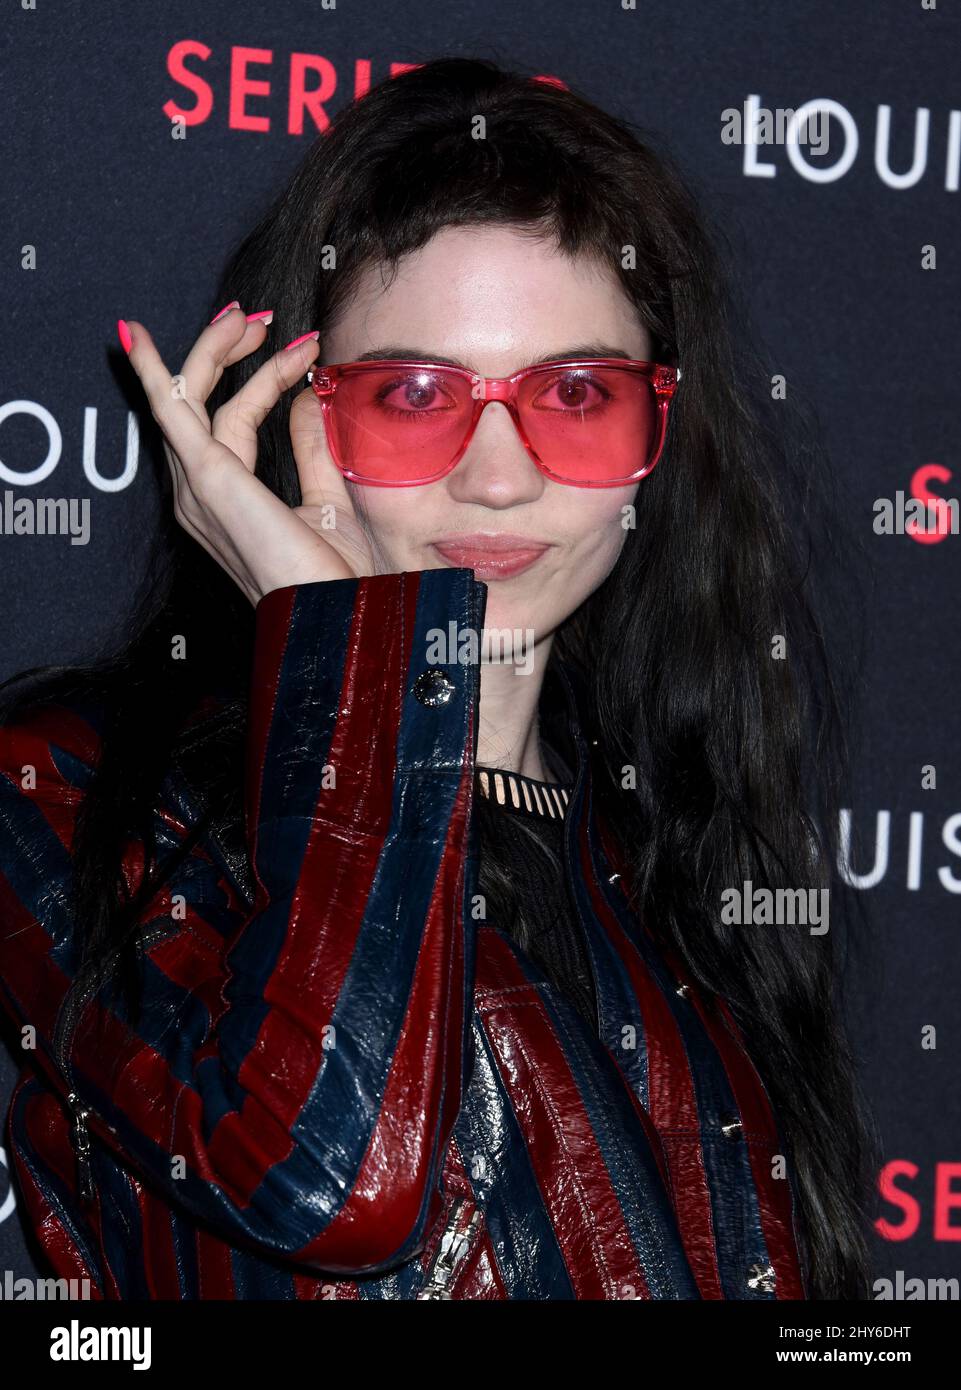 Grimes attends an event called, Louis Vuitton unveils an unconventional exhibition, 'SERIES 2 ??? Past, Present and Future'. This exhibition is a modern and unexpected interpretation of a fashion show. February 5, 2015 Los Angeles, Ca. Stock Photo